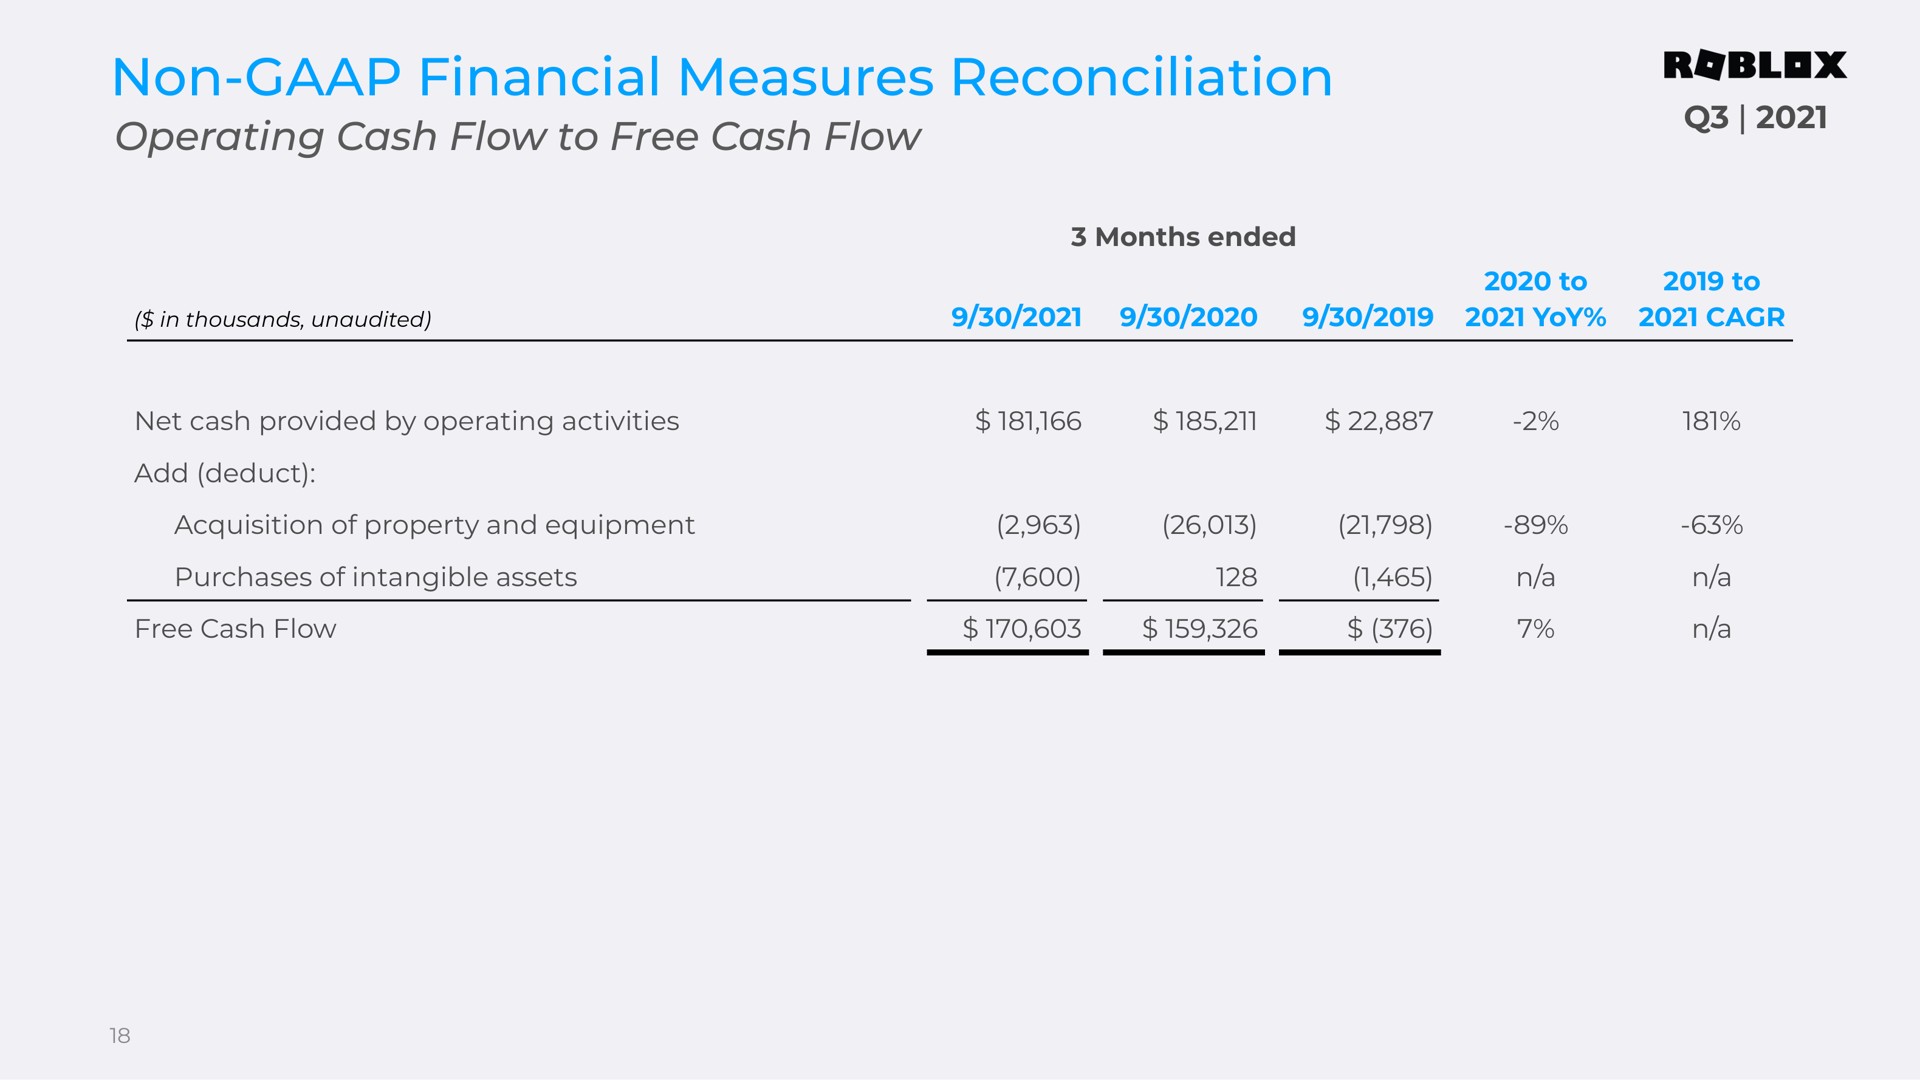 non financial measures reconciliation operating cash flow to free cash flow reviewed updated | Roblox